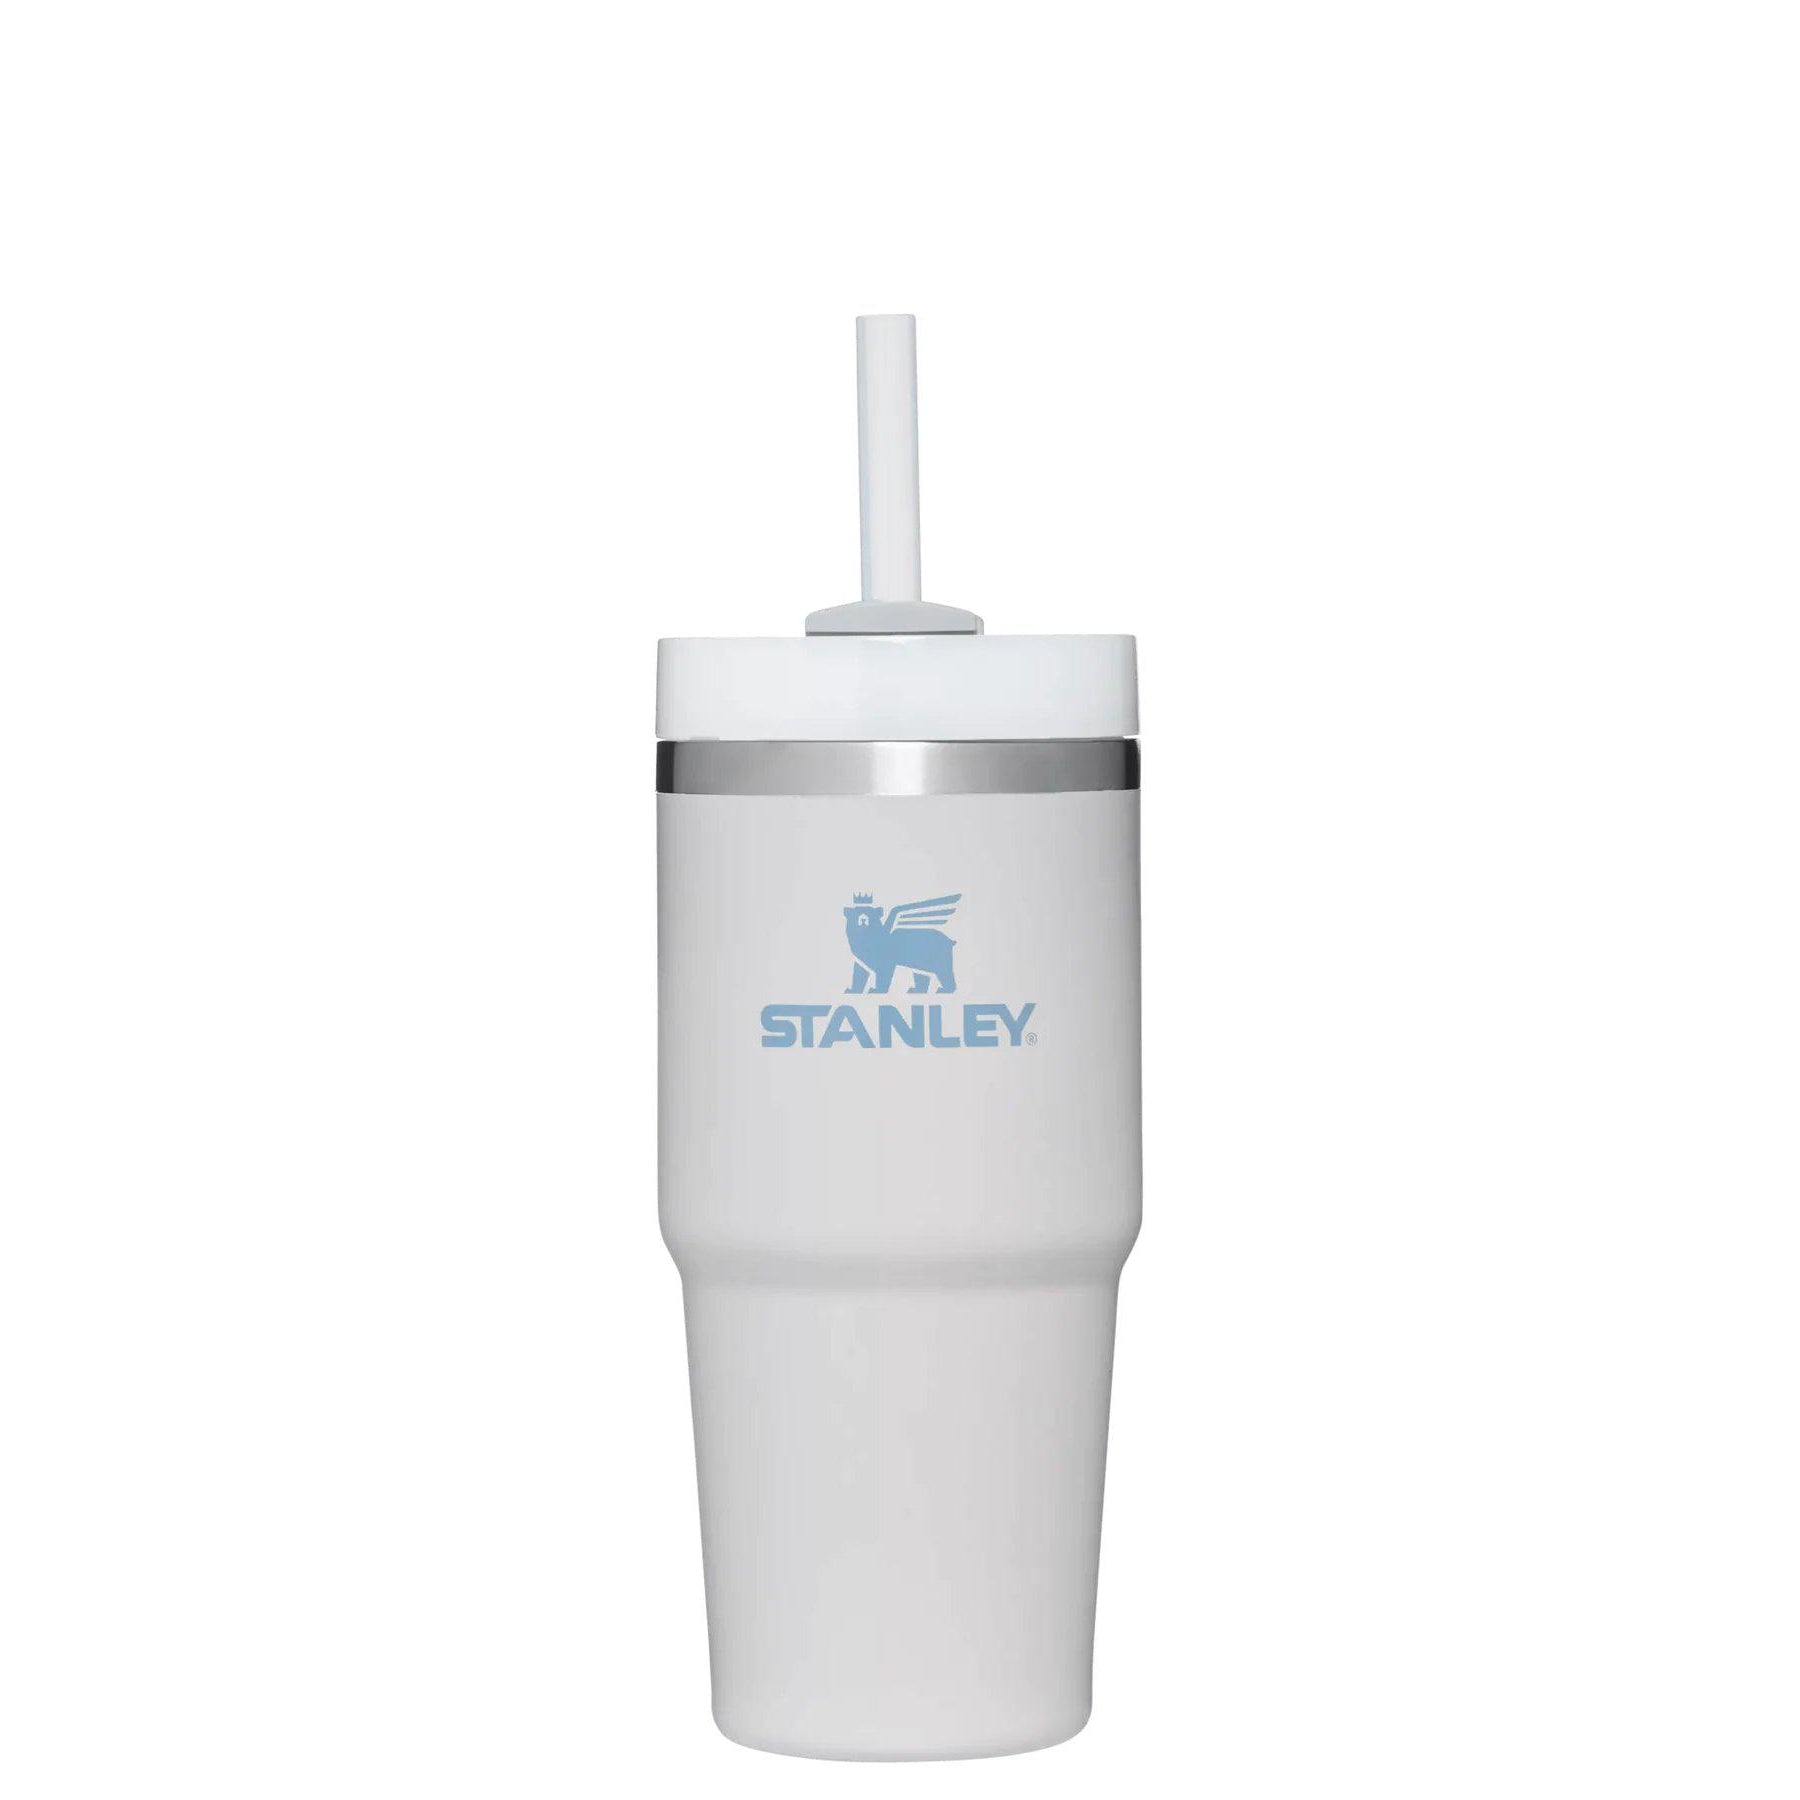 STANLEY TUMBLERS, 30,40 and 64 oz. Great gifts for the holidays or get  hydrated and motivated. Link in Bio.